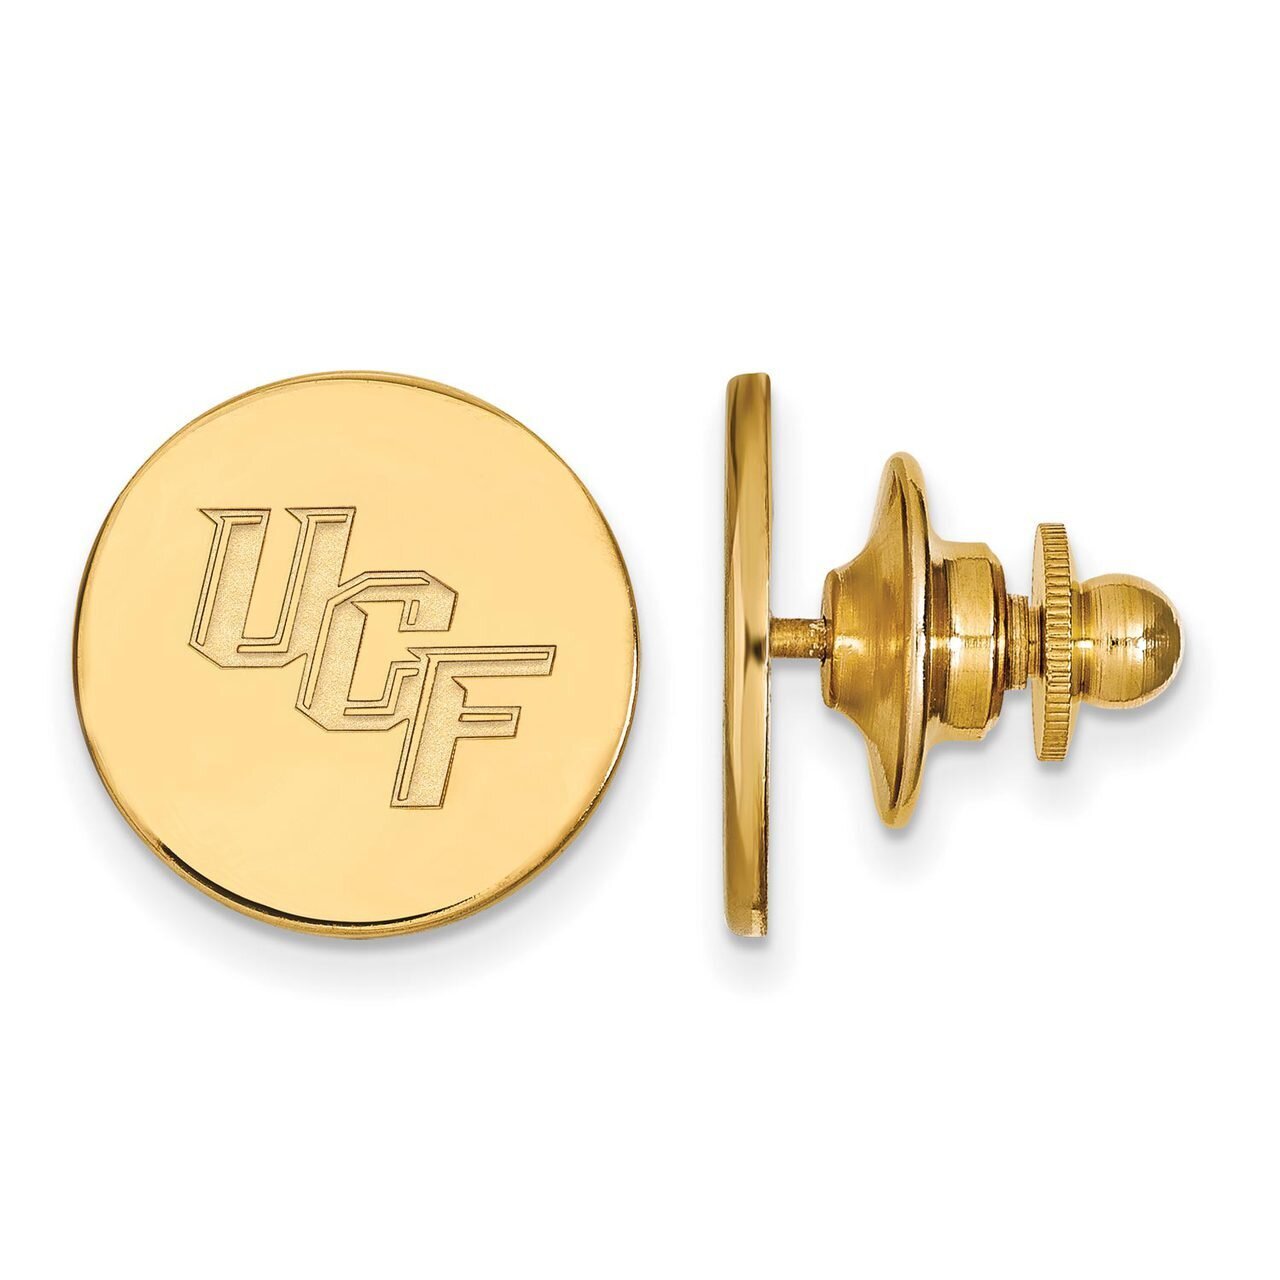 University of Central Florida Lapel Pin 14k Yellow Gold 4Y009UCF